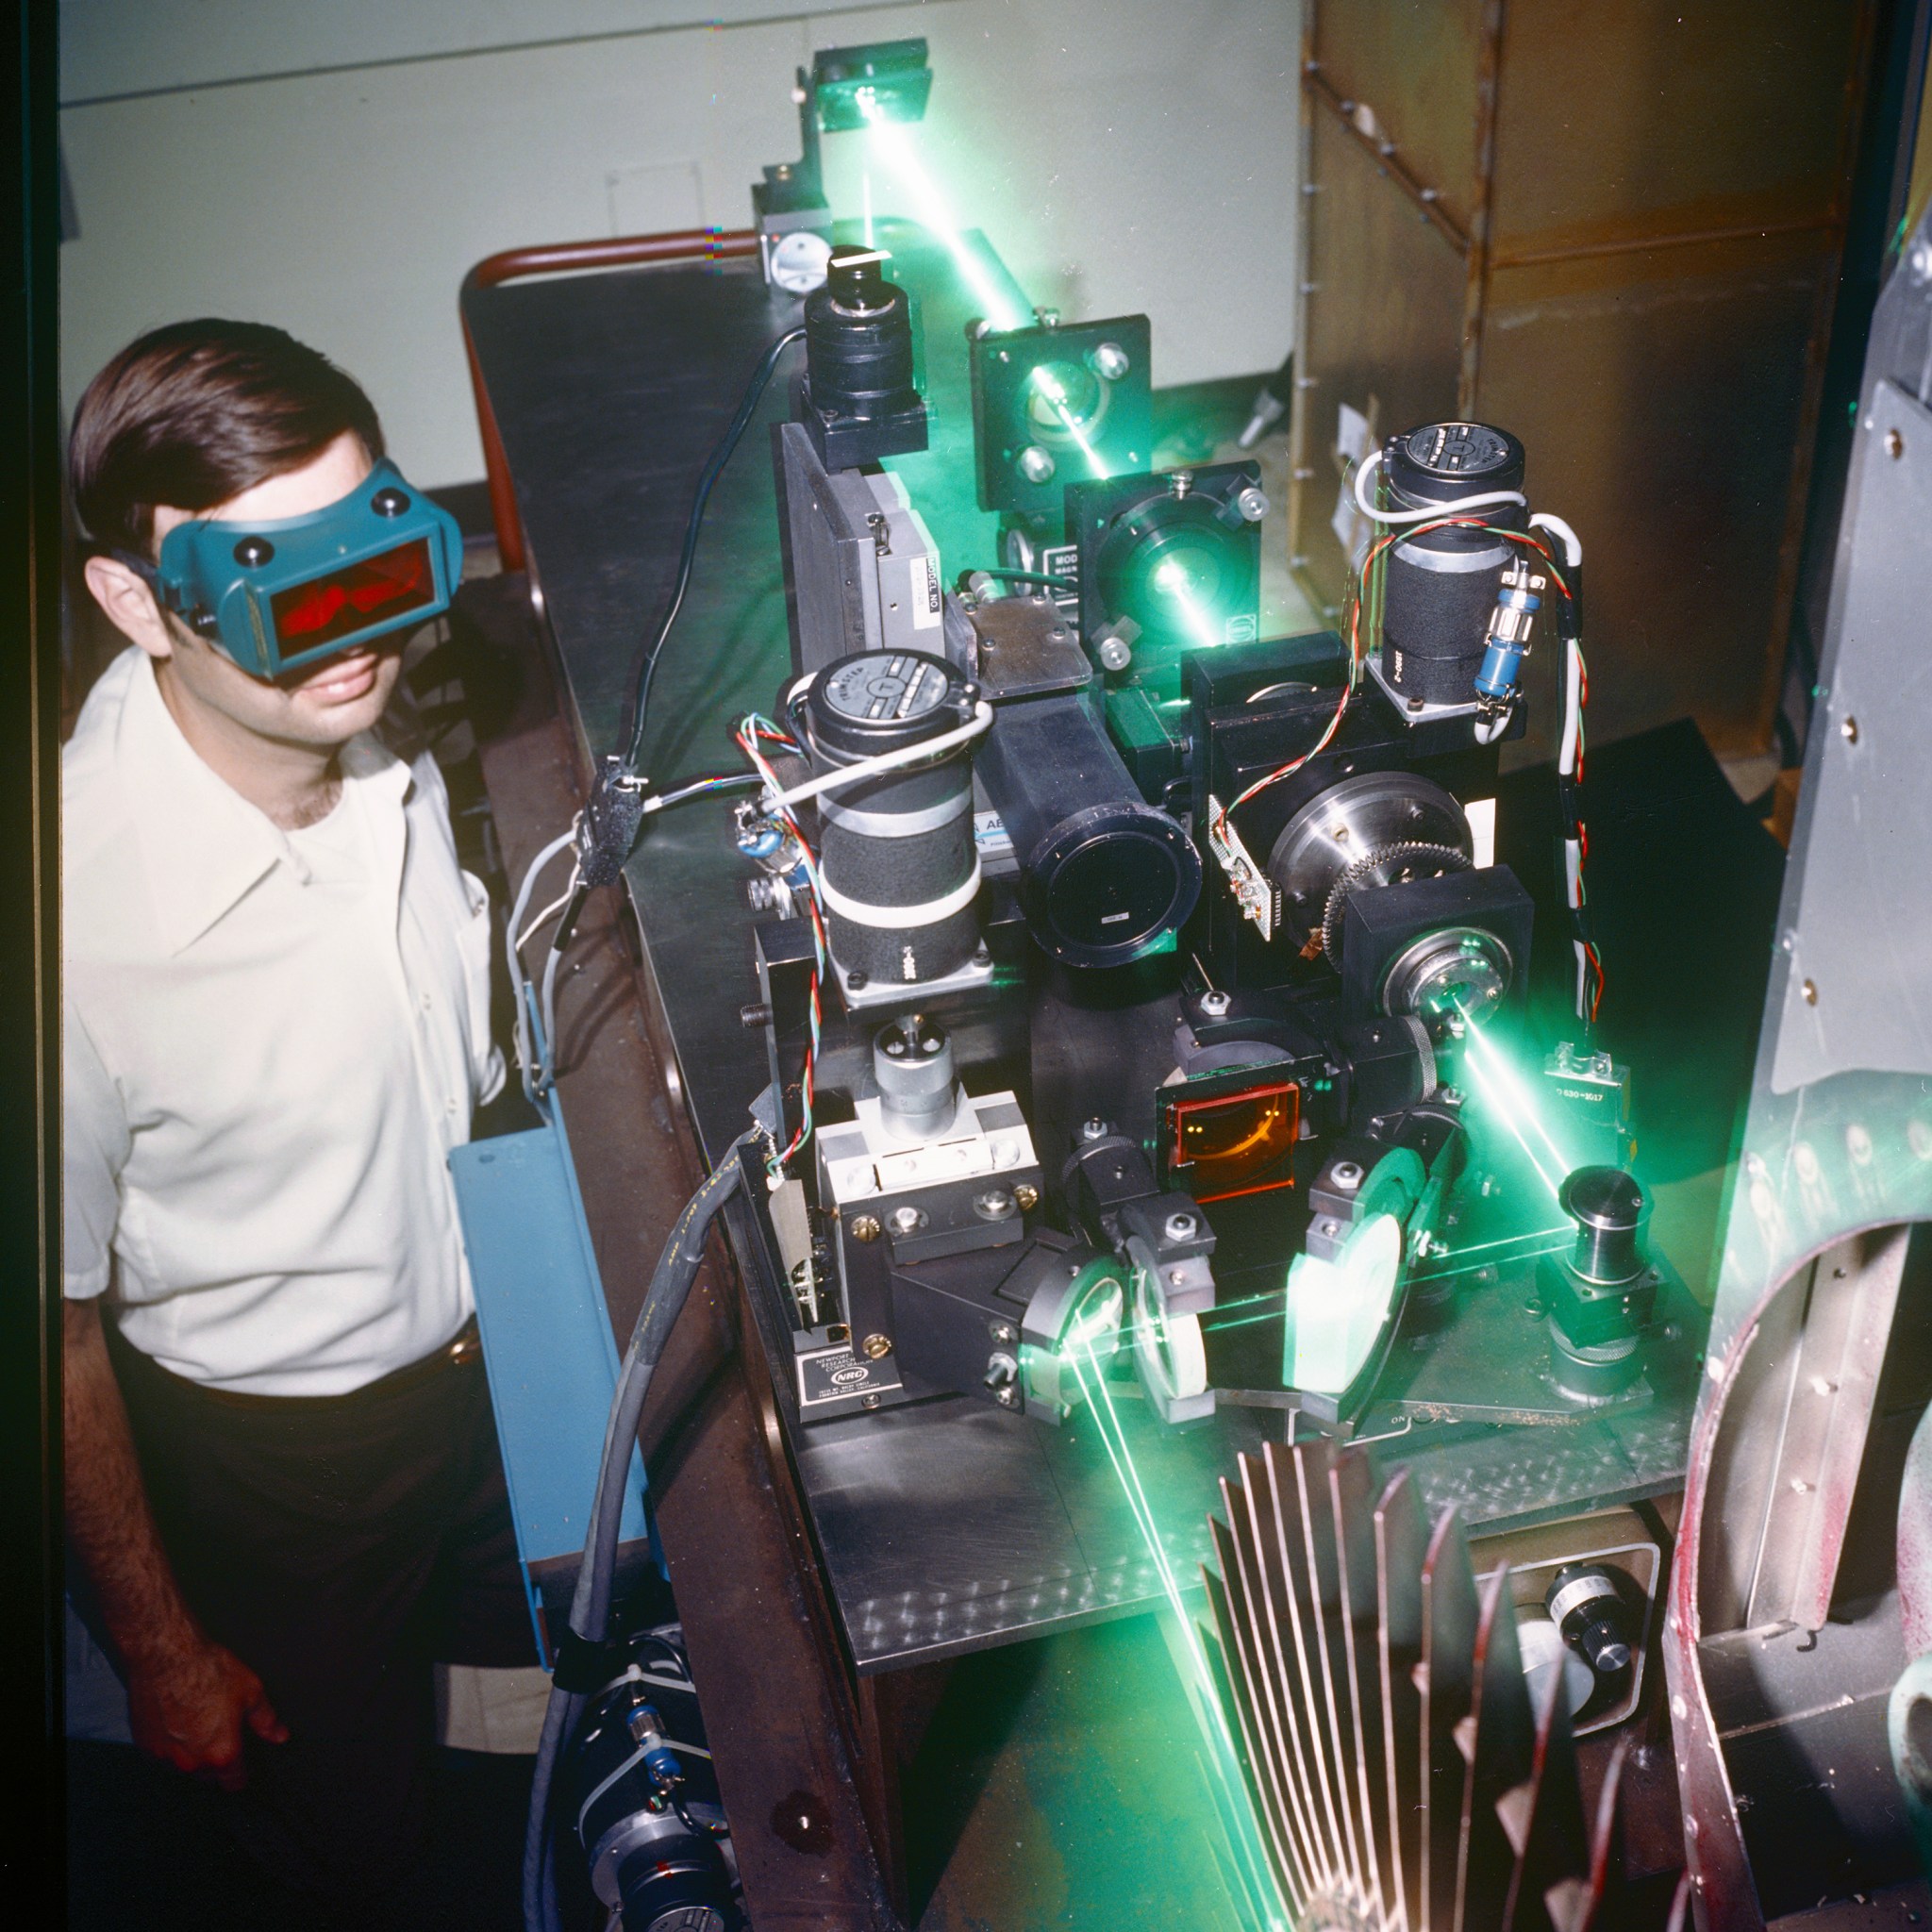 Man working with laser.